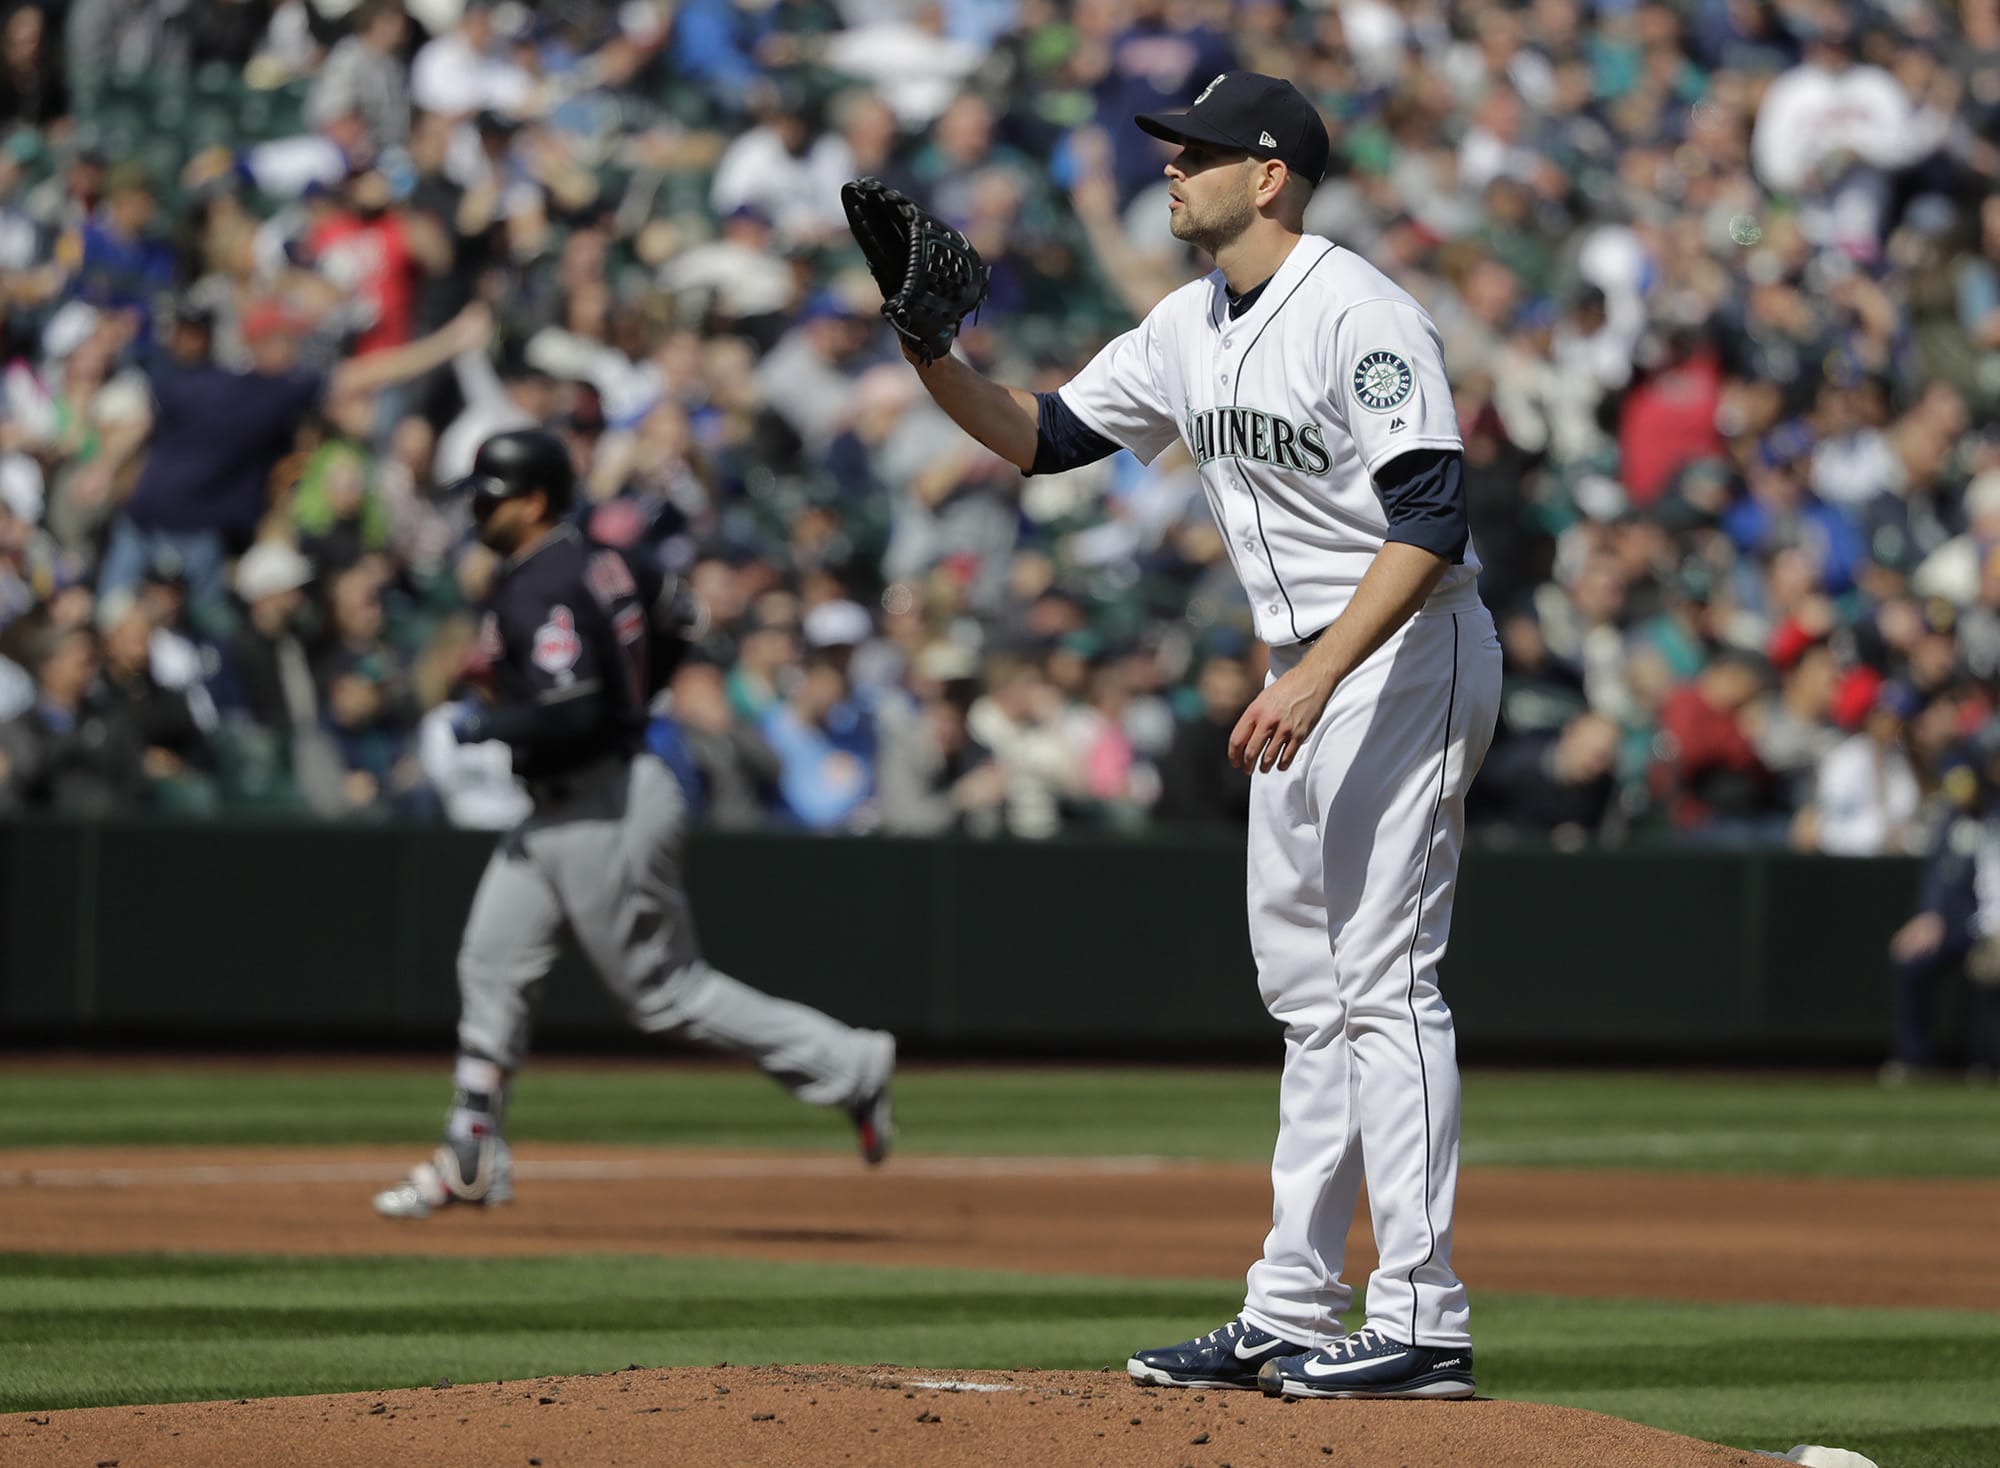 Seattle Mariners starting pitcher James Paxton, right, stands on the mound as Cleveland Indians' Yonder Alonso, left, rounds the bases after Alonso hit a grand slam during the first inning of a baseball game, Saturday, March 31, 2018, in Seattle. (AP Photo/Ted S.